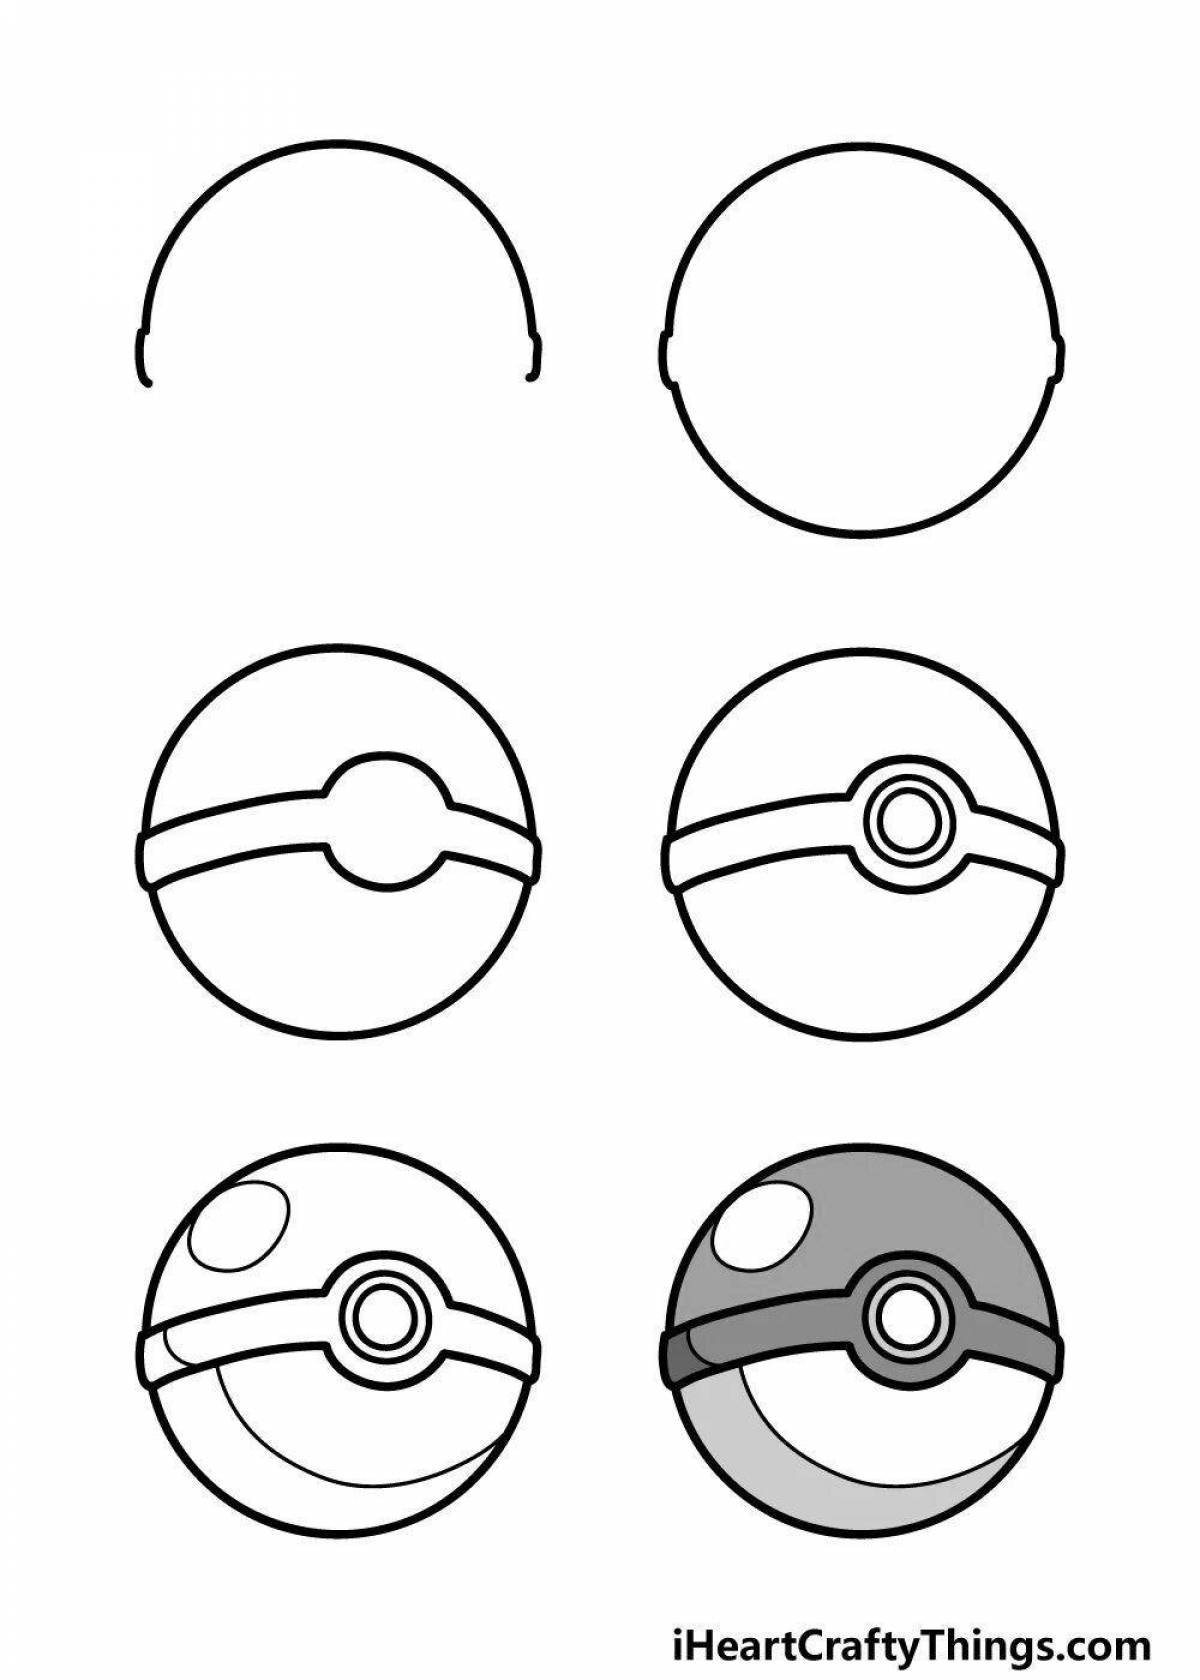 Coloring page sweet pikachu and pokeball